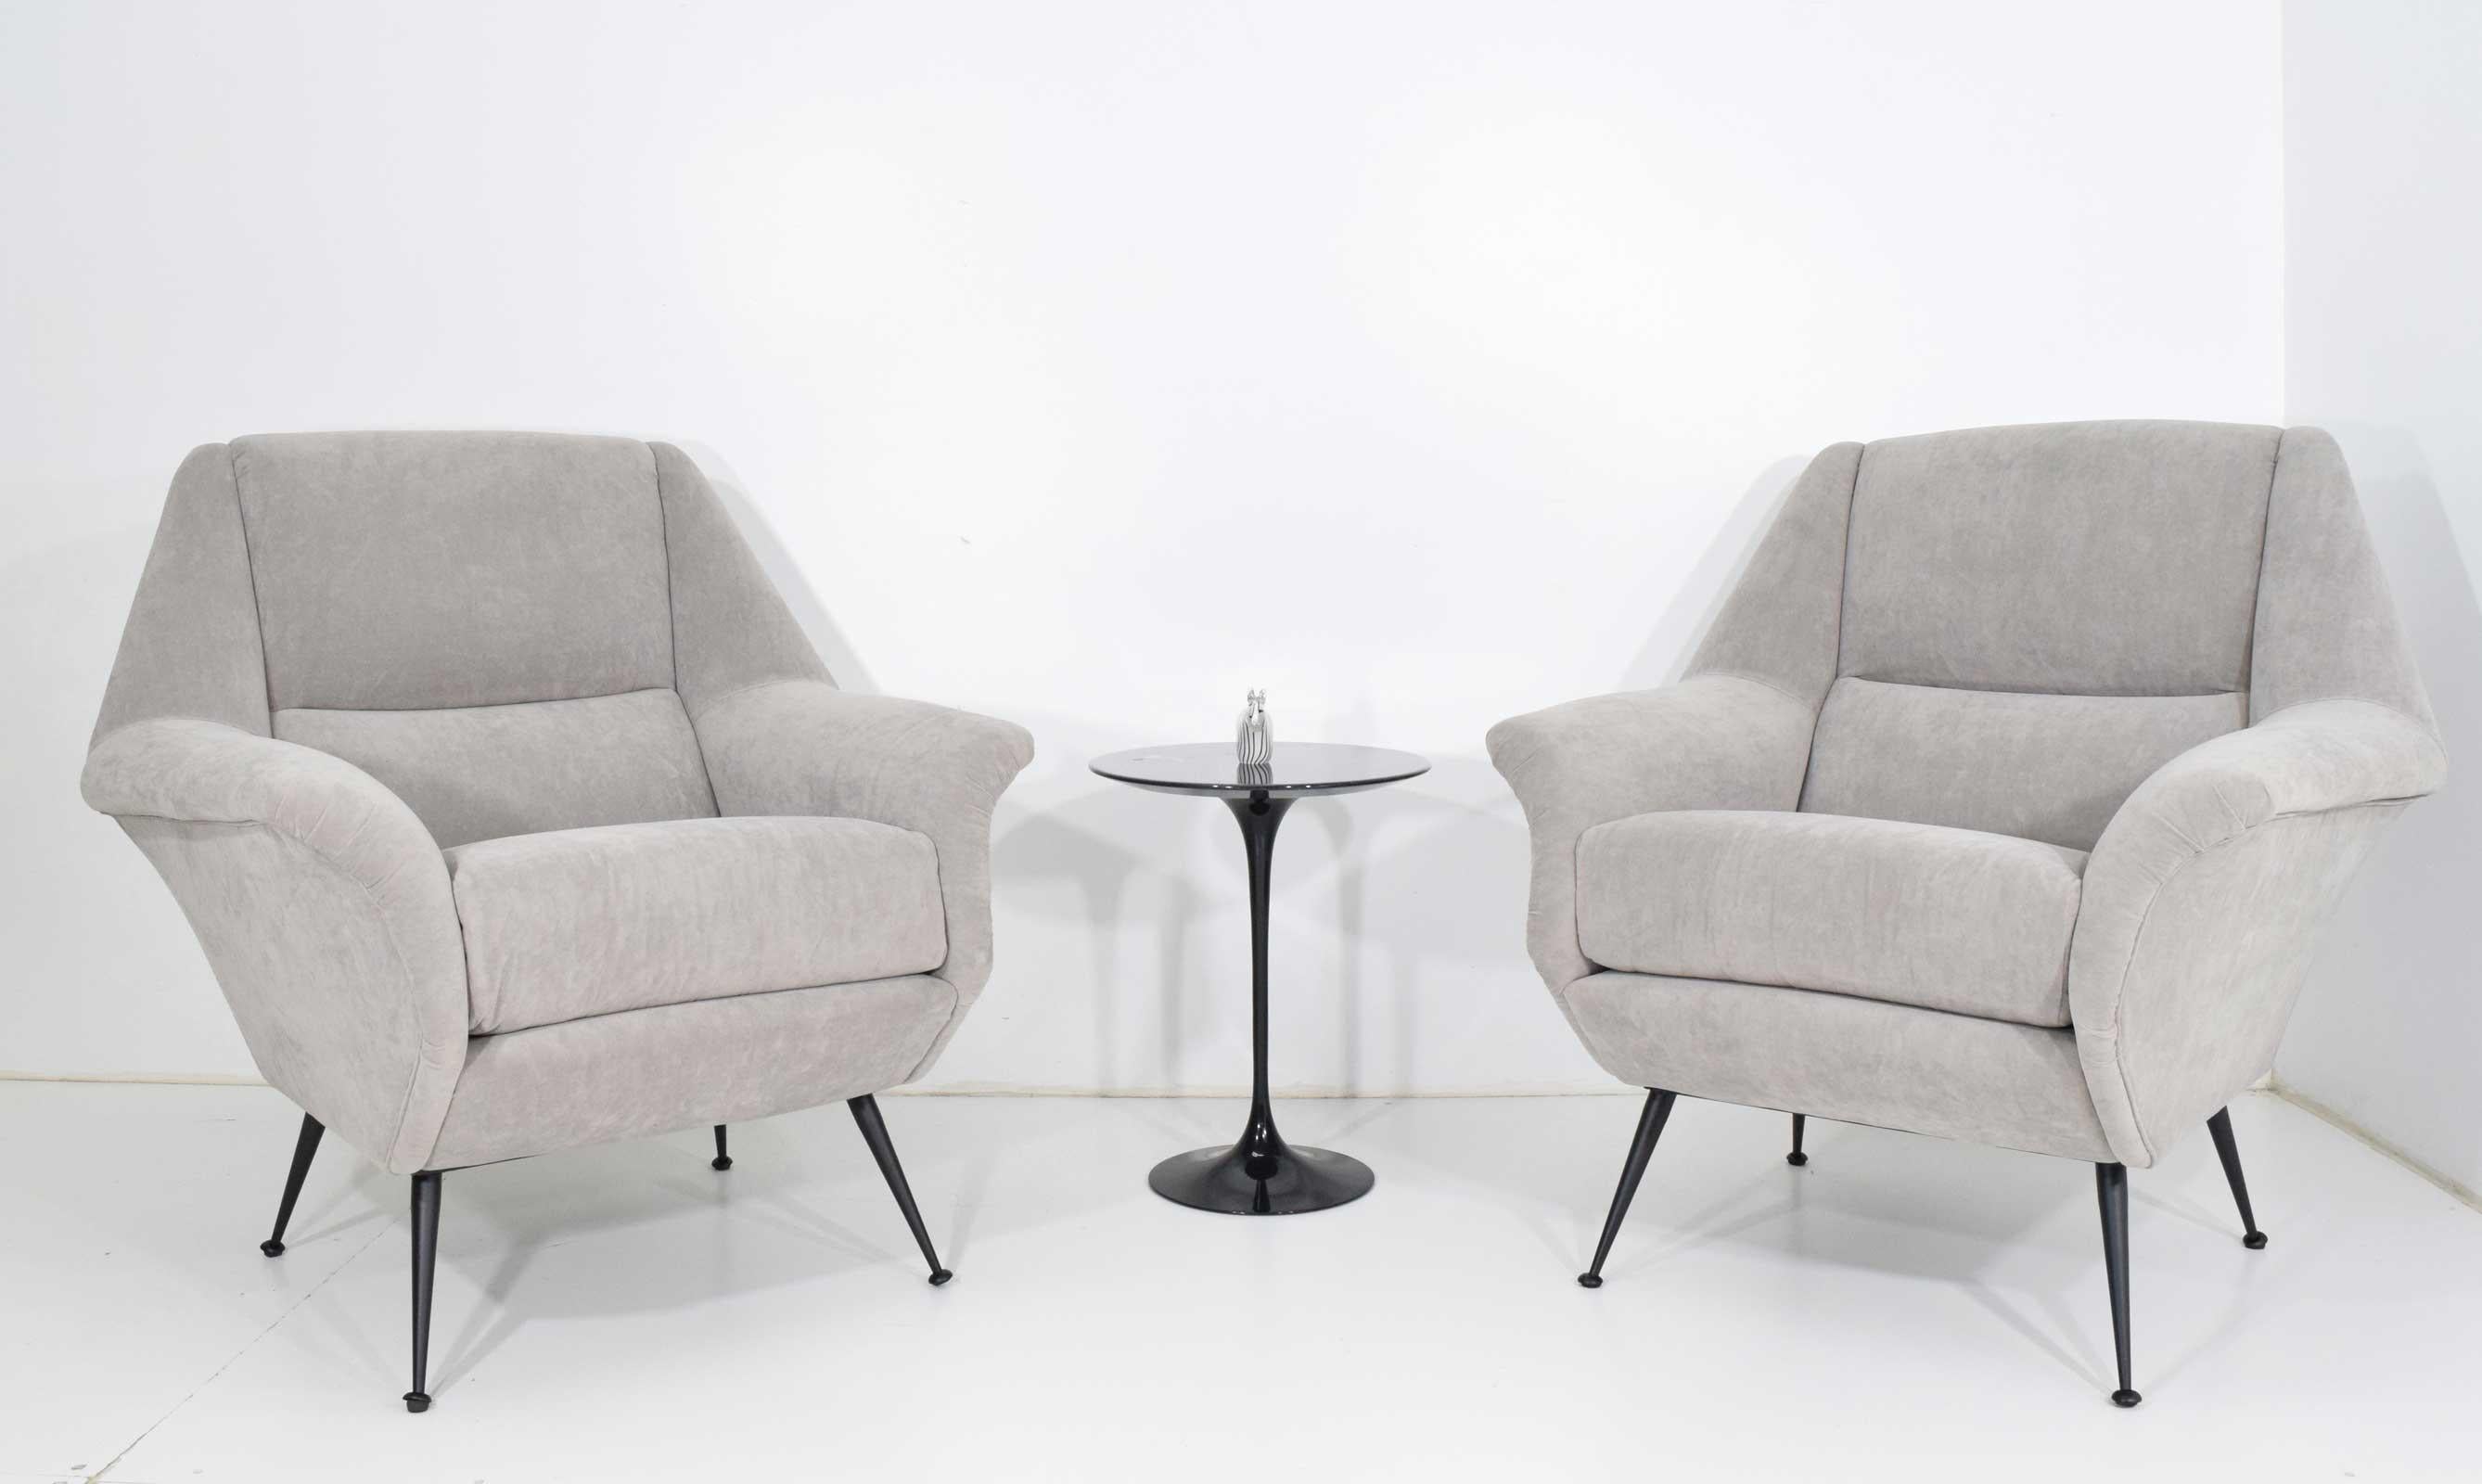 Italian Gigi Radice lounge chairs in a pale gray microfiber. These can be reupholstered to open up the back and eliminate the seat cushion.